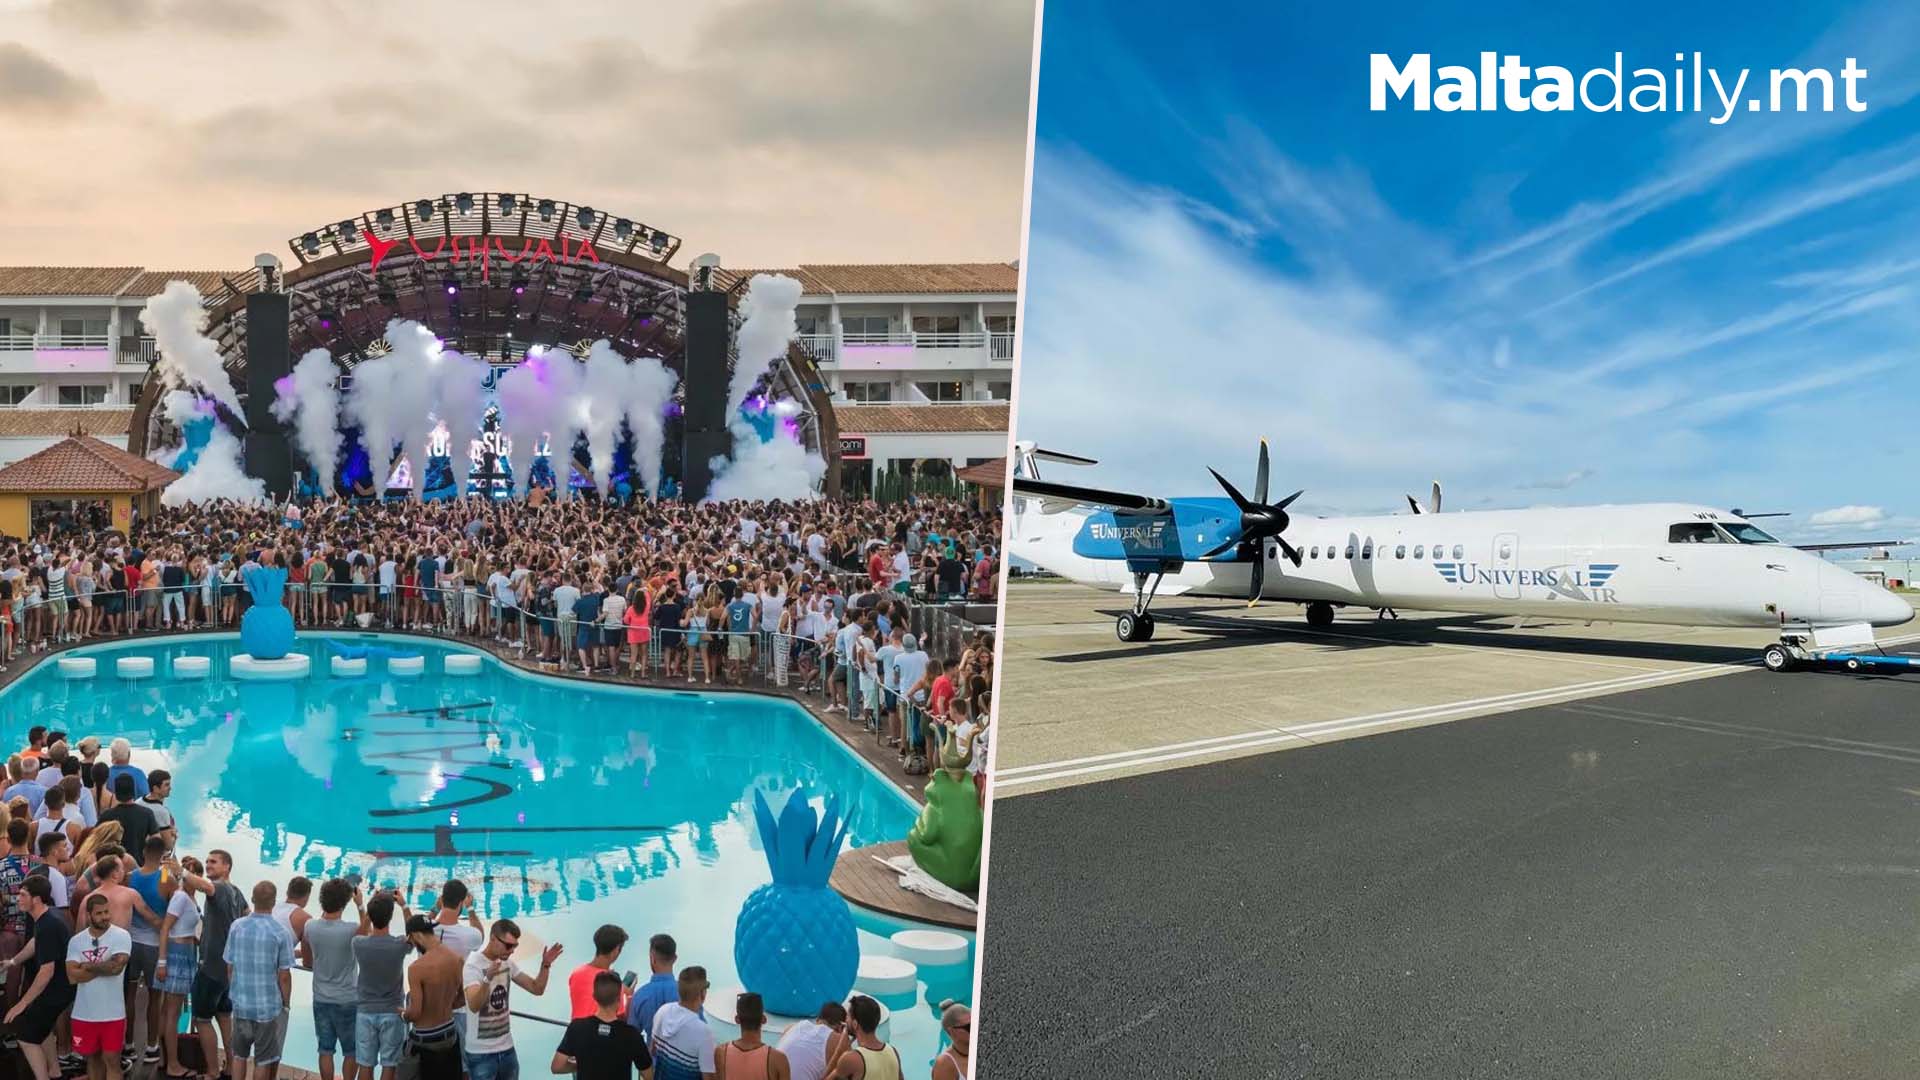 New Airline To Offer Direct Flights From Malta To Ibiza